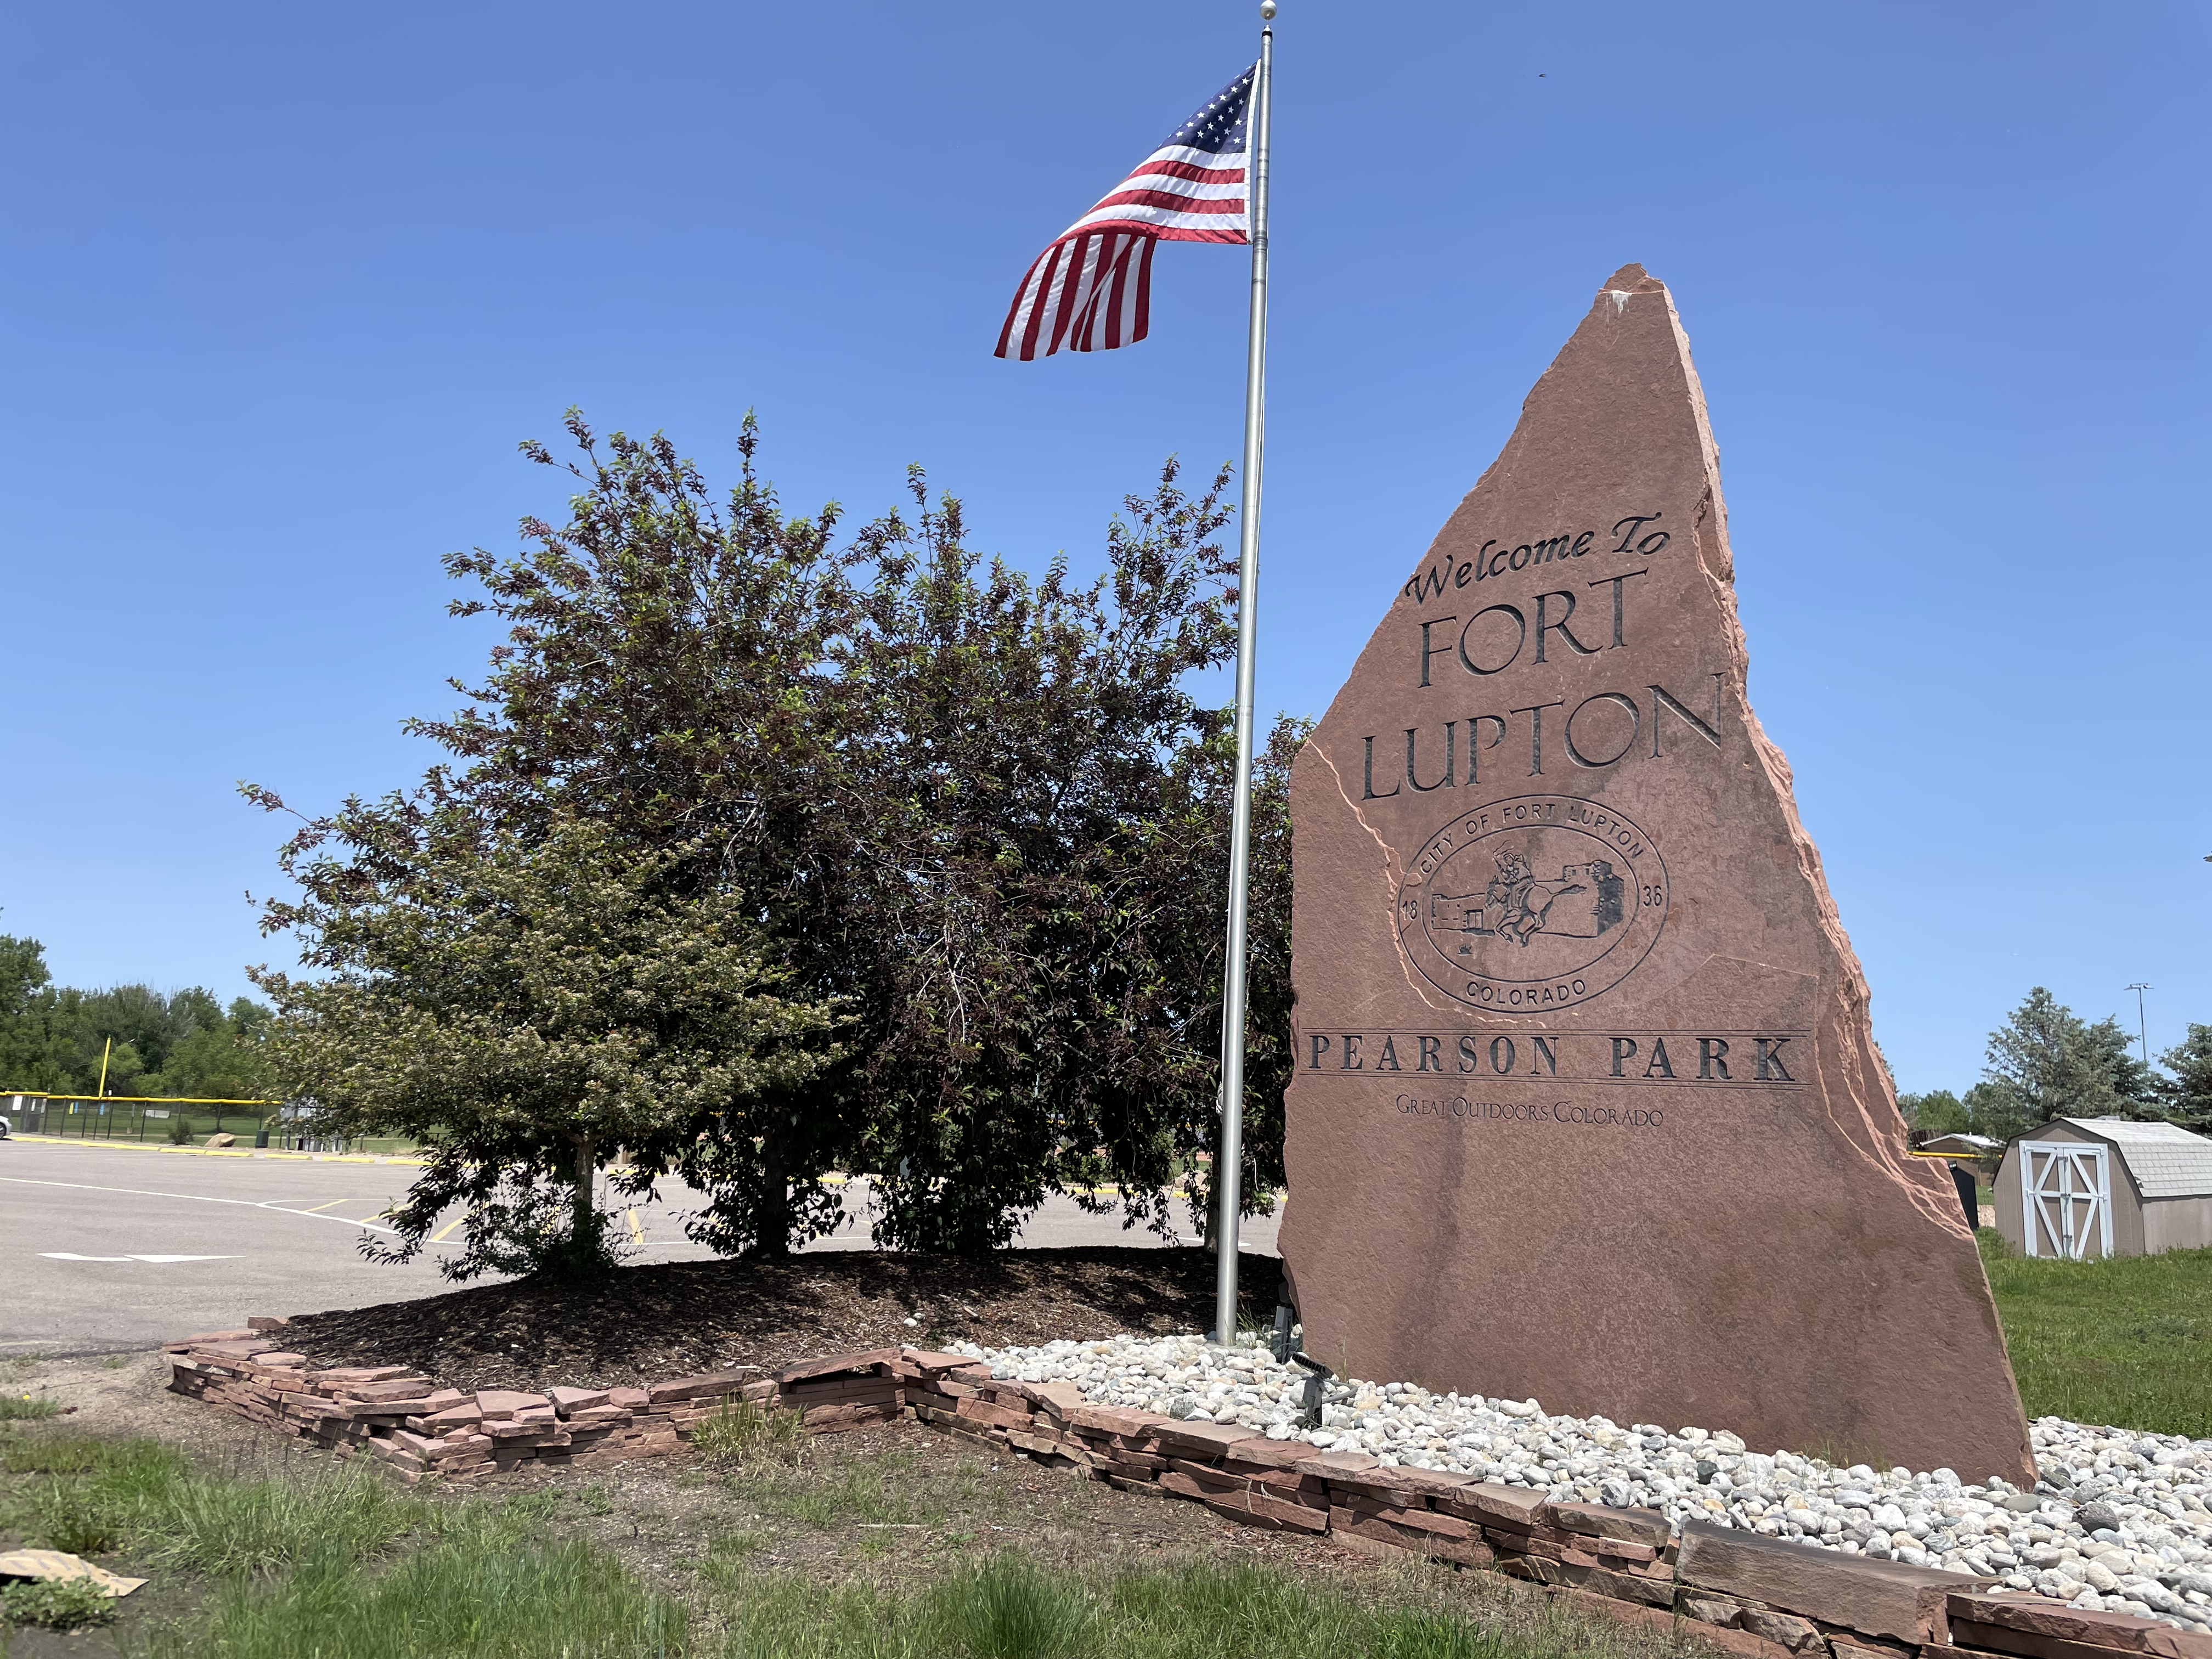 City_Fort Lupton Entry Sign